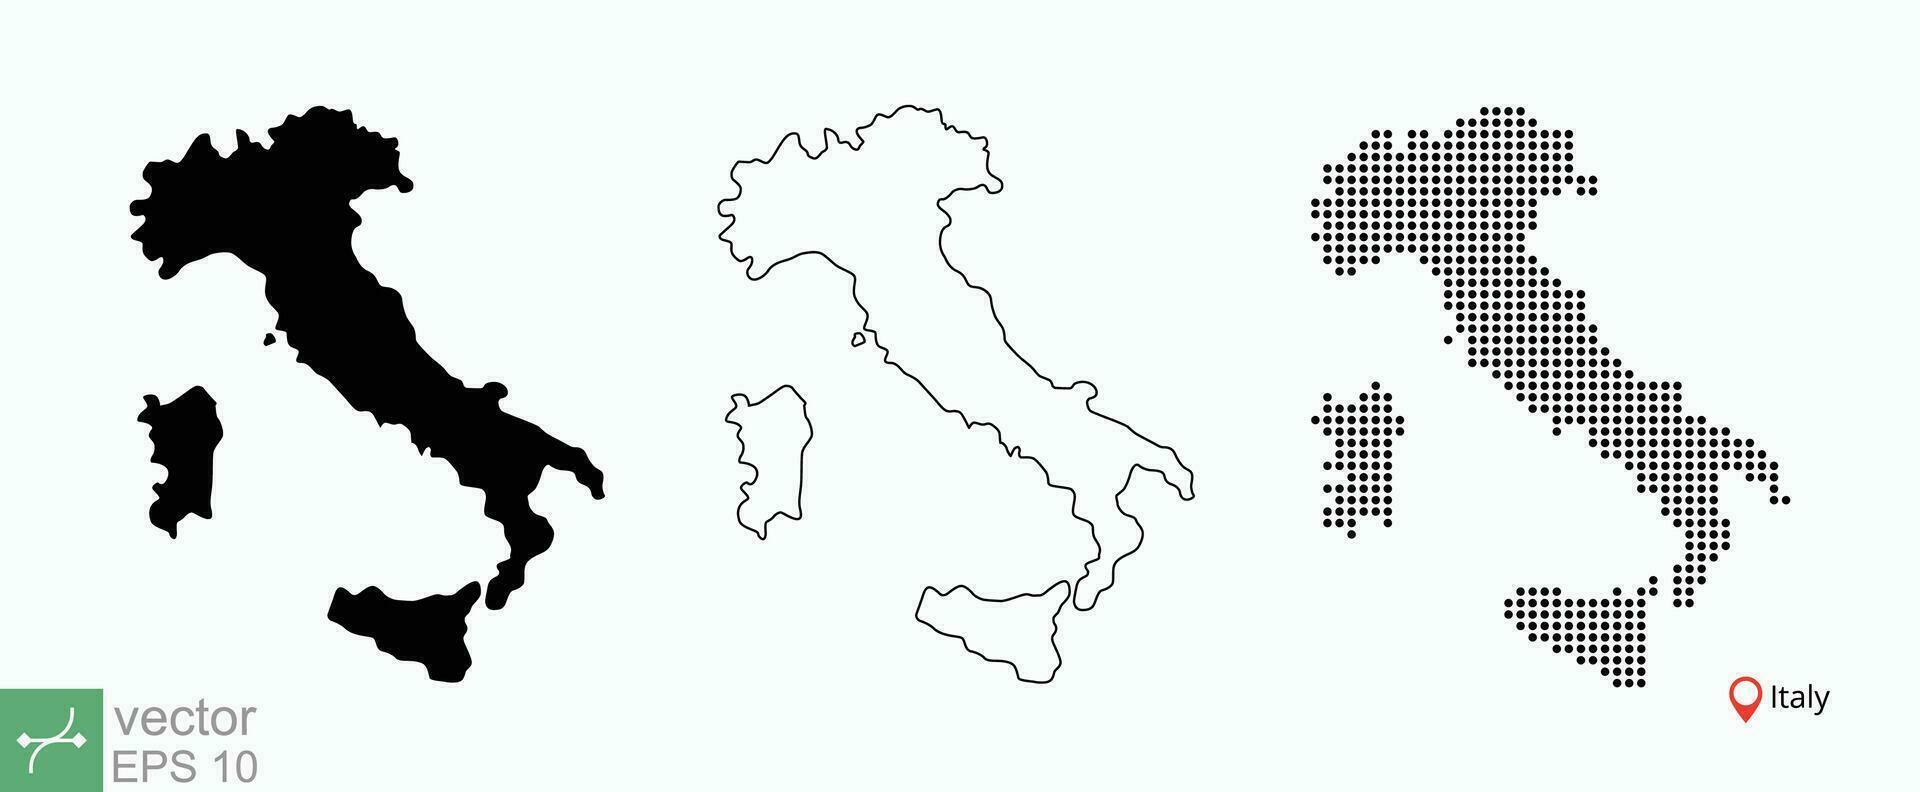 Italy map. Italia, region, europe, state, country, geography concept. Silhouette, outline, plan, dot map. Simple flat style. Vector illustration isolated on white background. EPS 10.